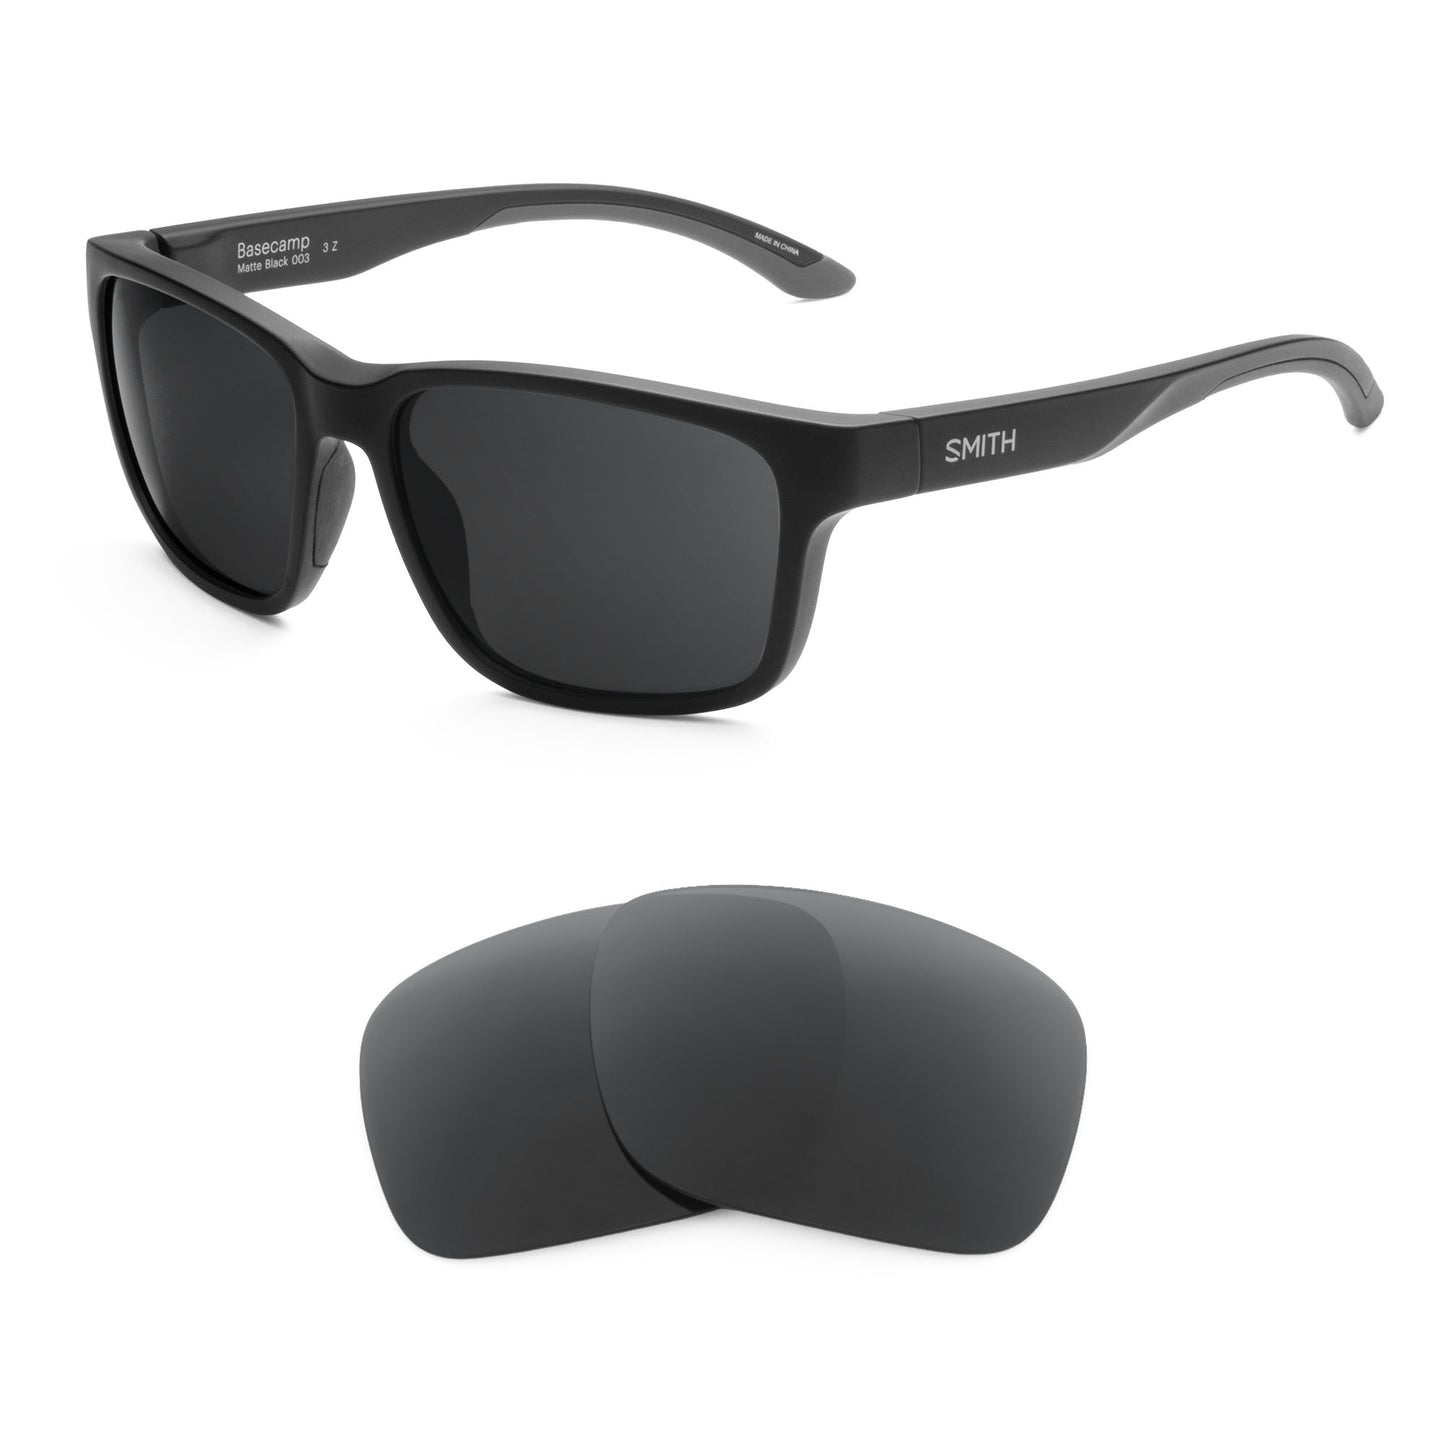 Smith Basecamp sunglasses with replacement lenses